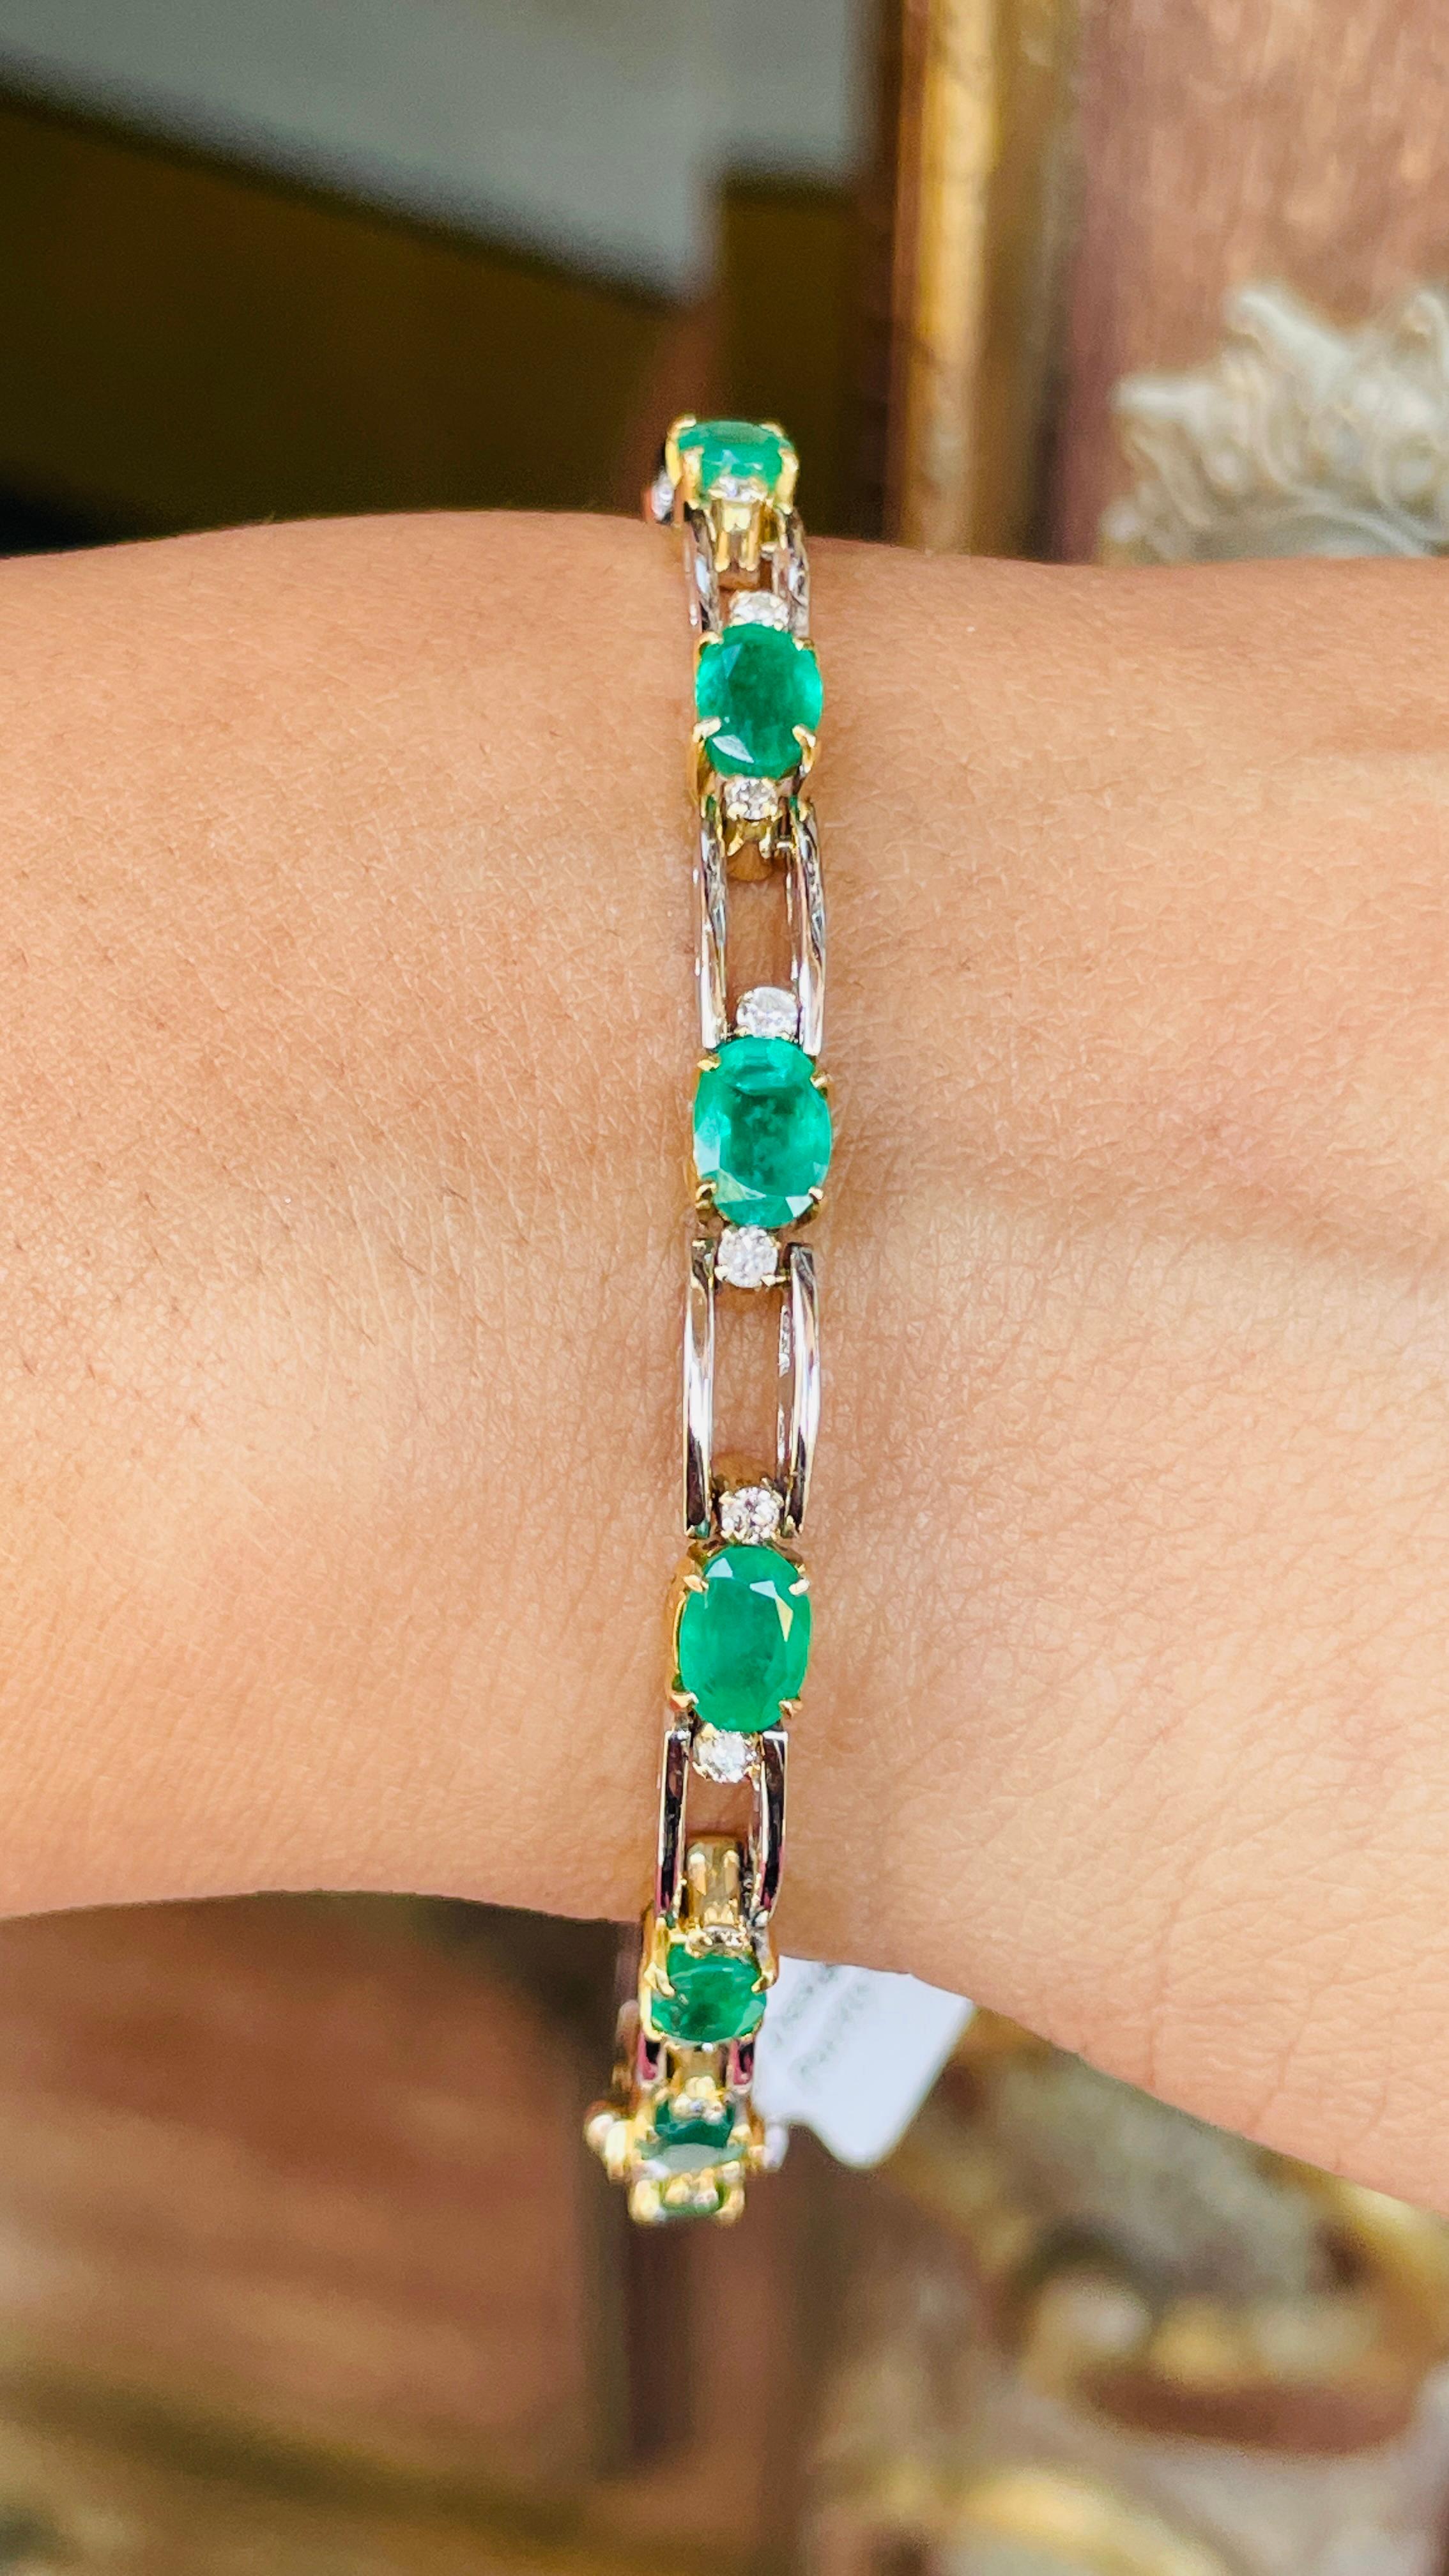 Emerald and Diamond bracelet in 18K Gold. It has a perfect oval cut gemstone to make you stand out on any occasion or an event.
A link bracelet is an essential piece of jewelry when it comes to your wedding day. The sleek and elegant style